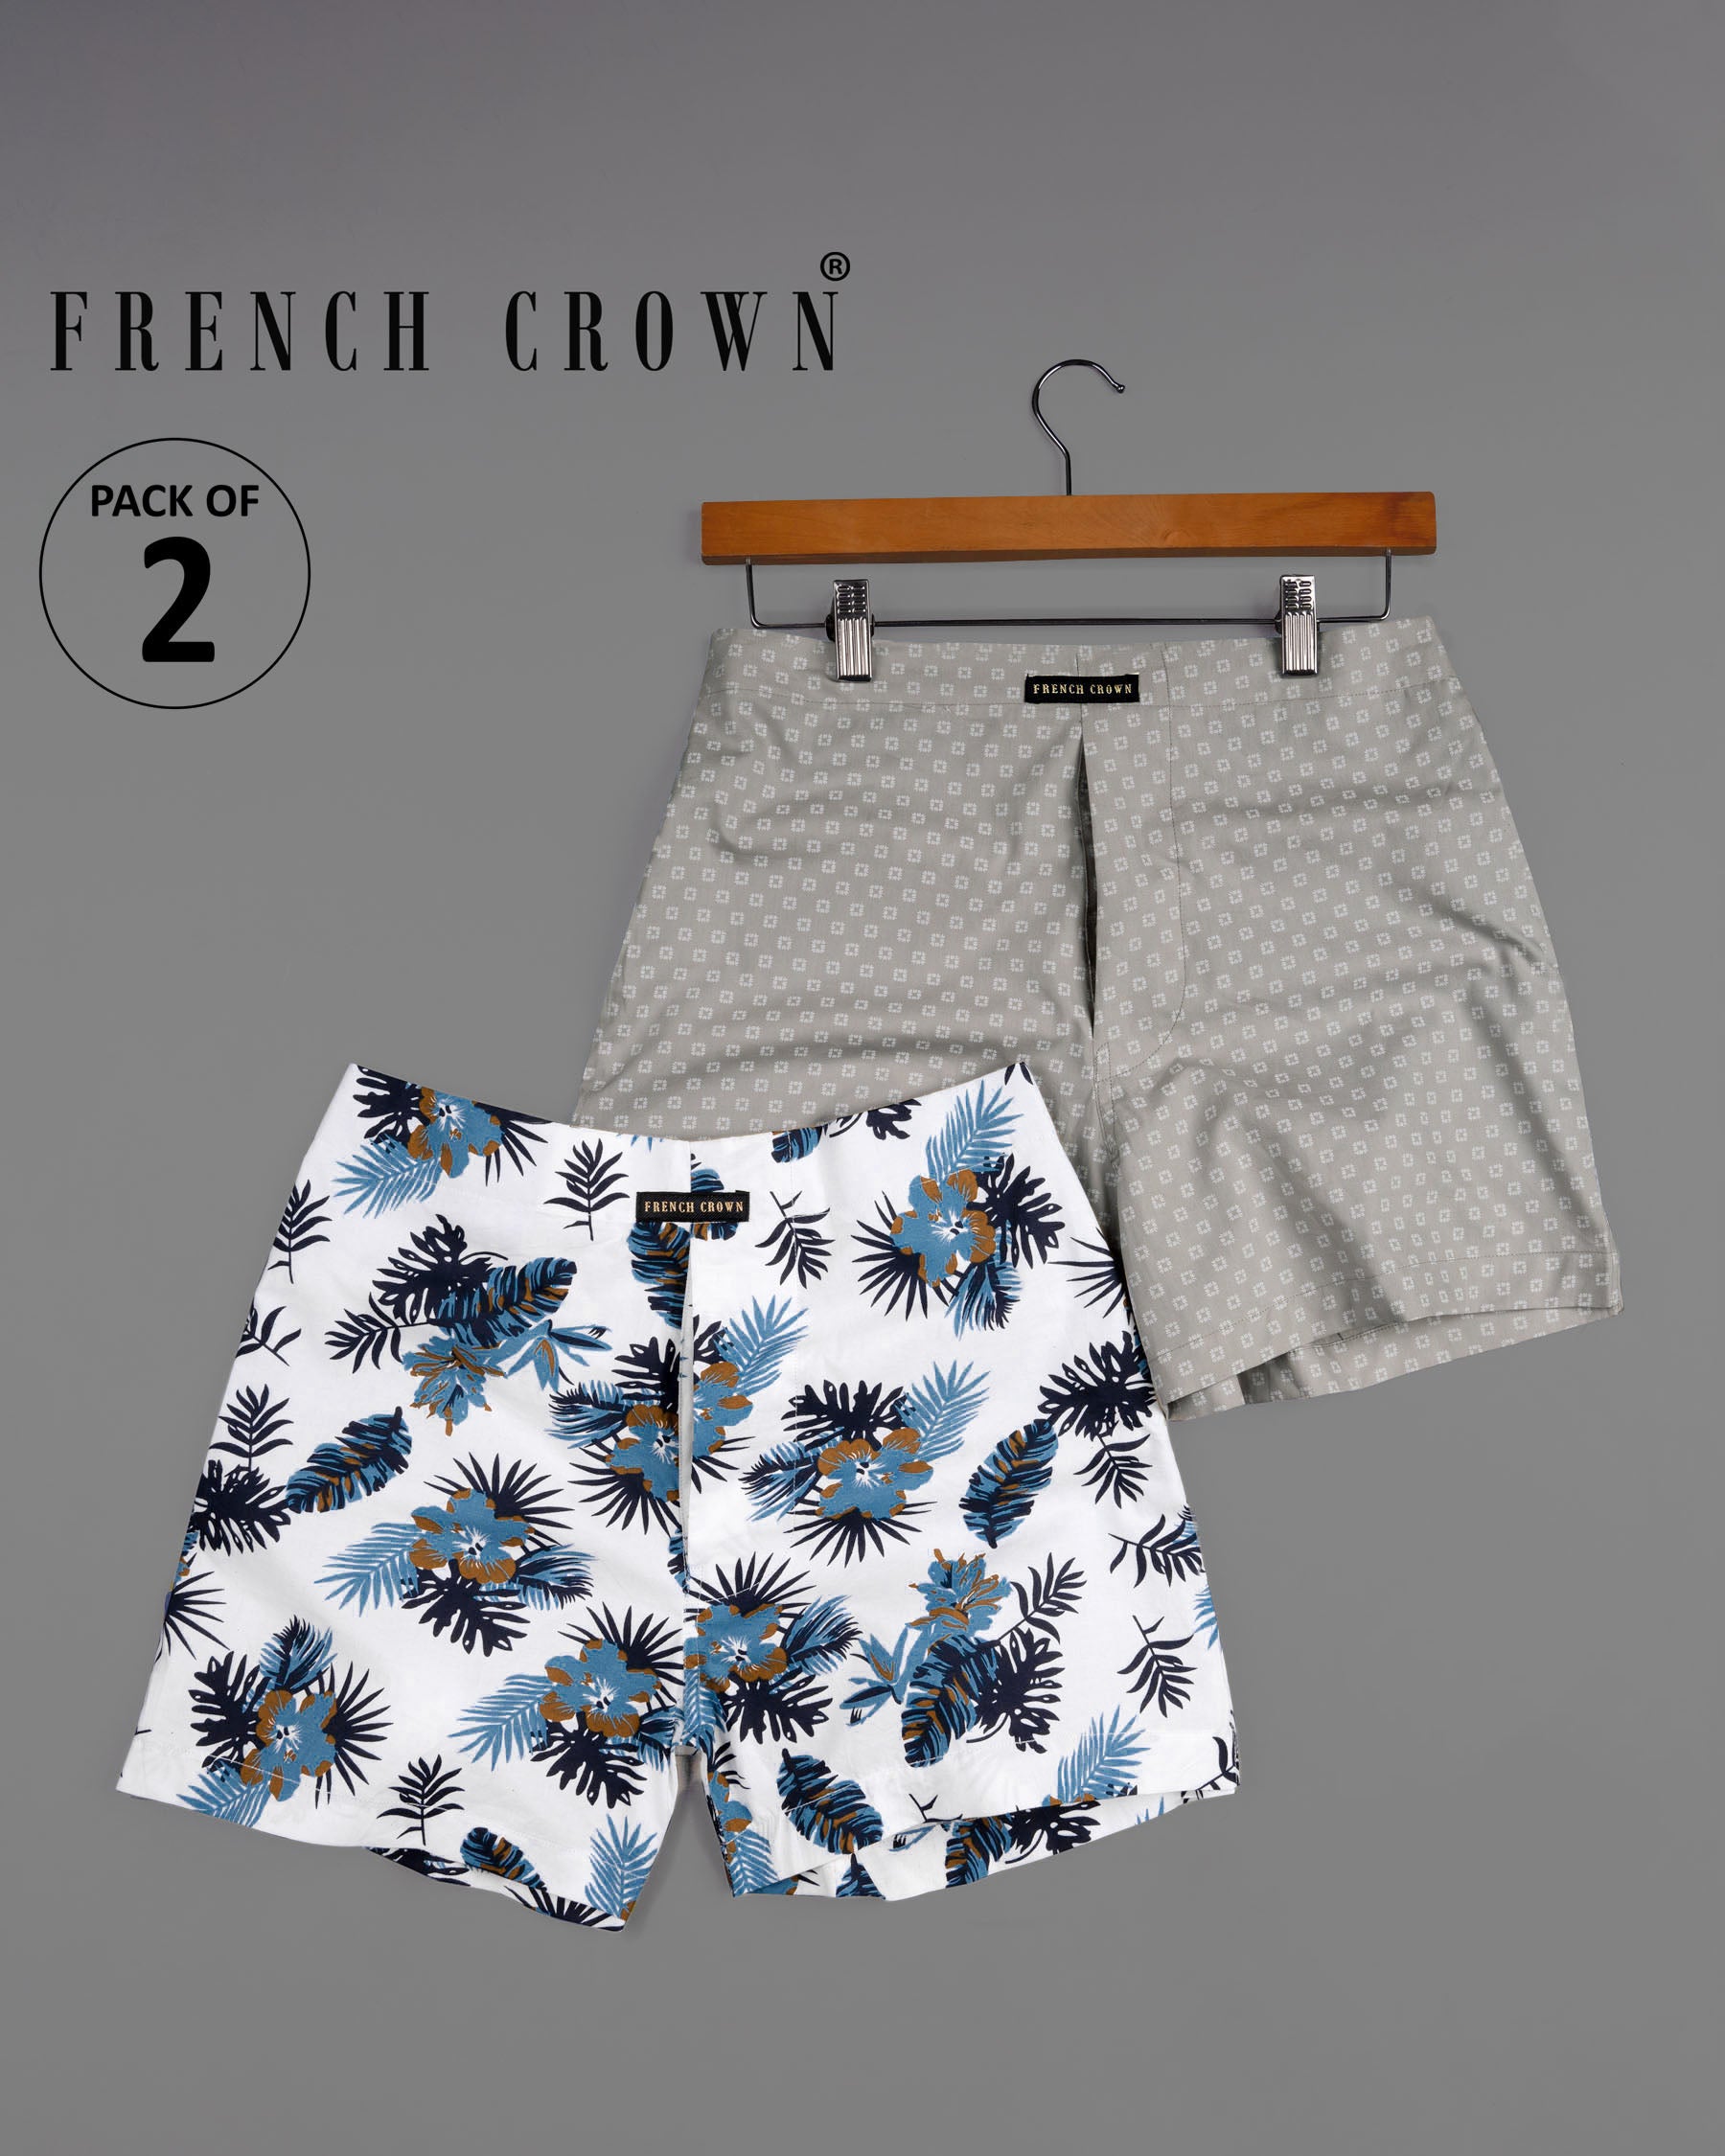 Bright White and Baltic Sea Tropical Printed Twill with Martini Gray Printed Oxford Boxers